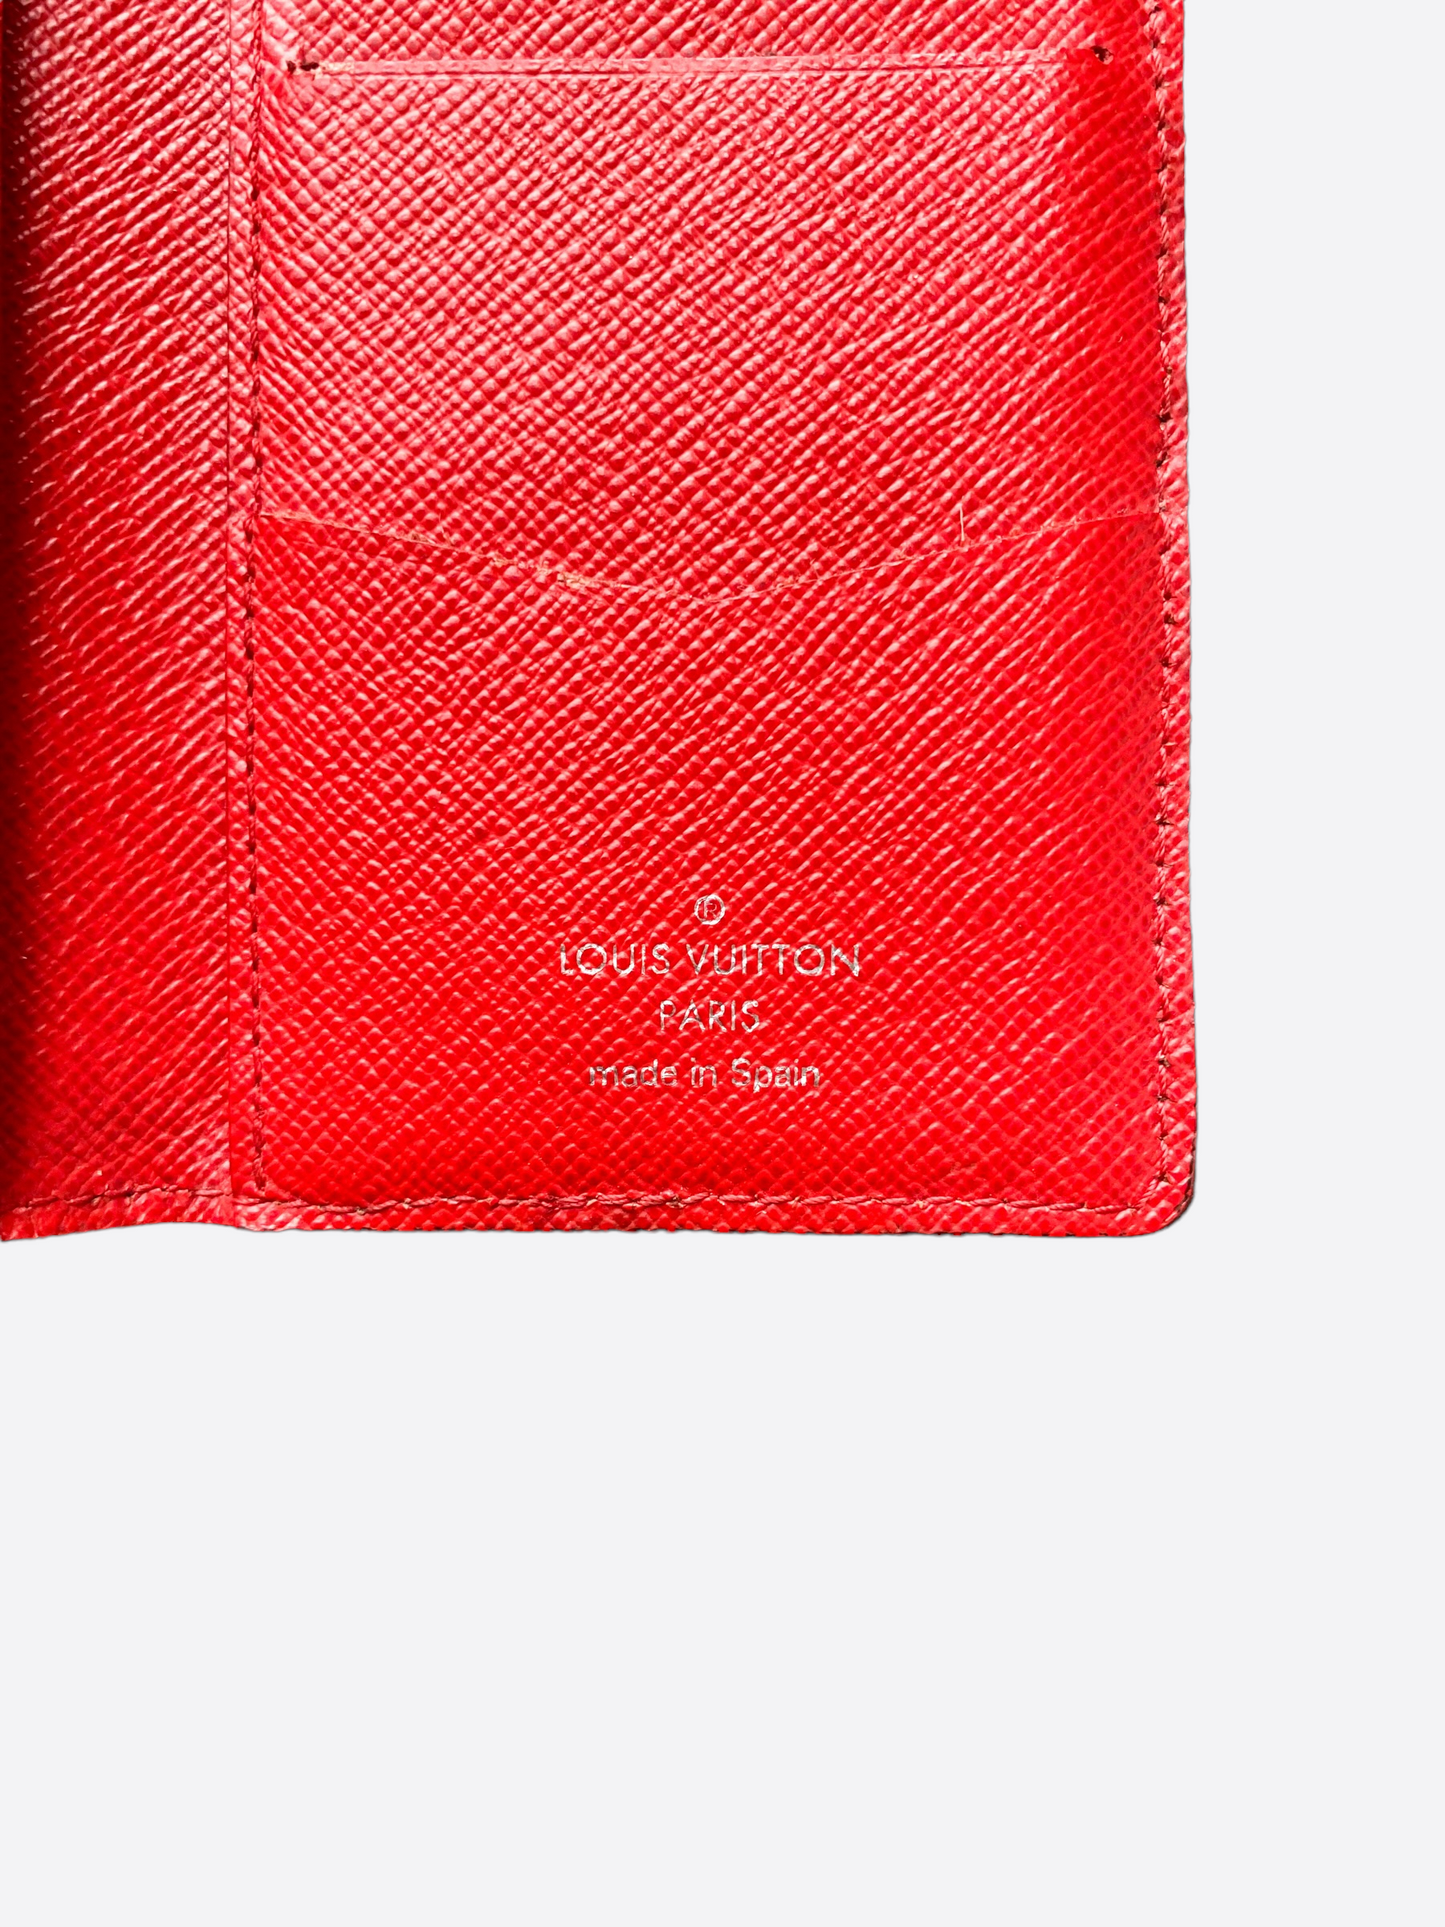 Louis Vuitton X Supreme Pocket Organizer Available For Immediate